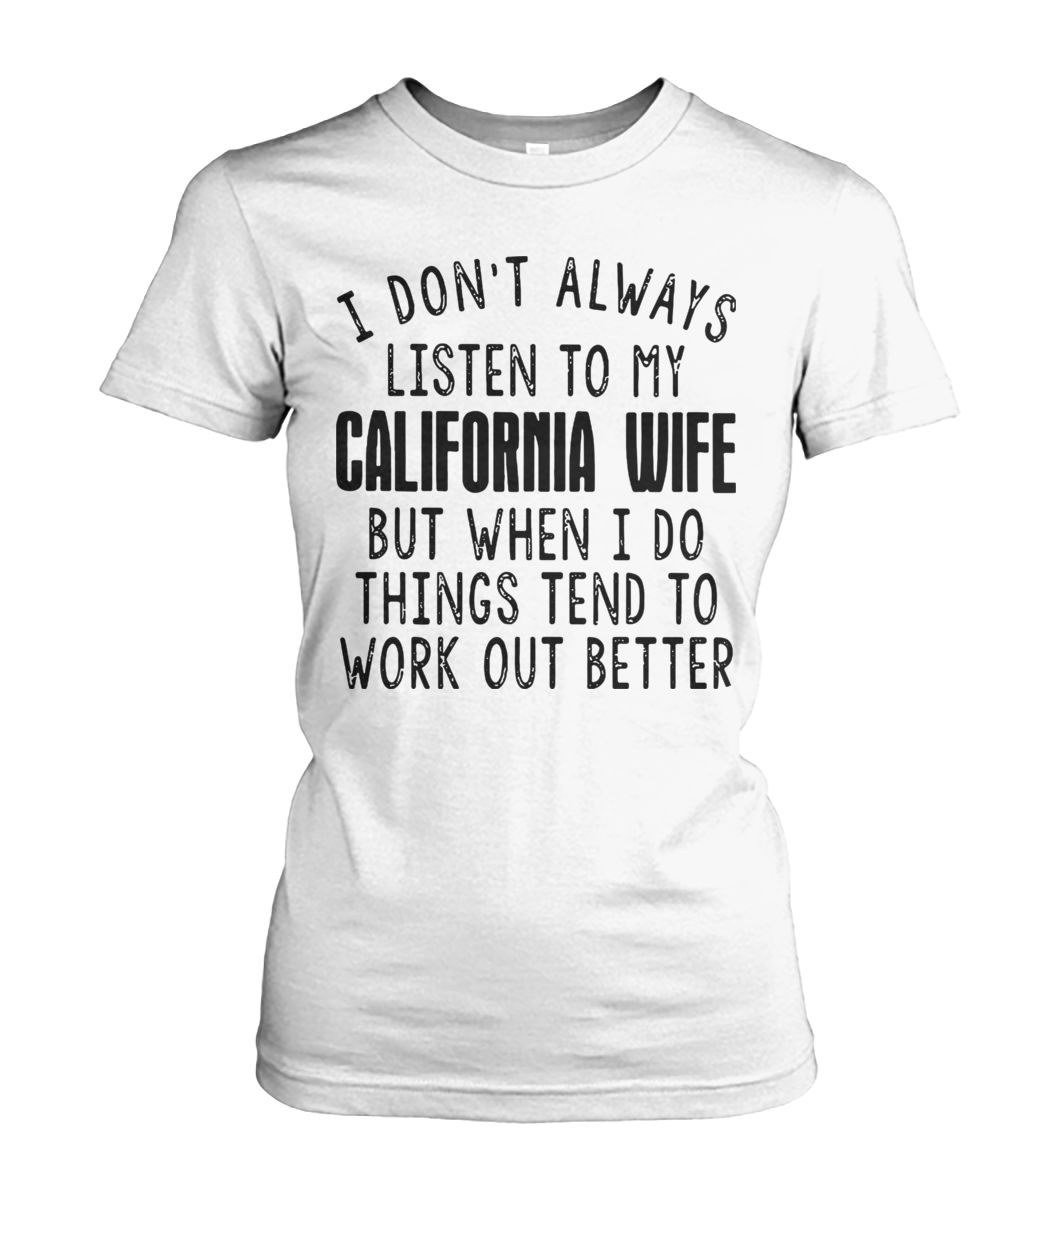 I don’t always listen to my california wife but when I do things tend to work out better women's crew tee